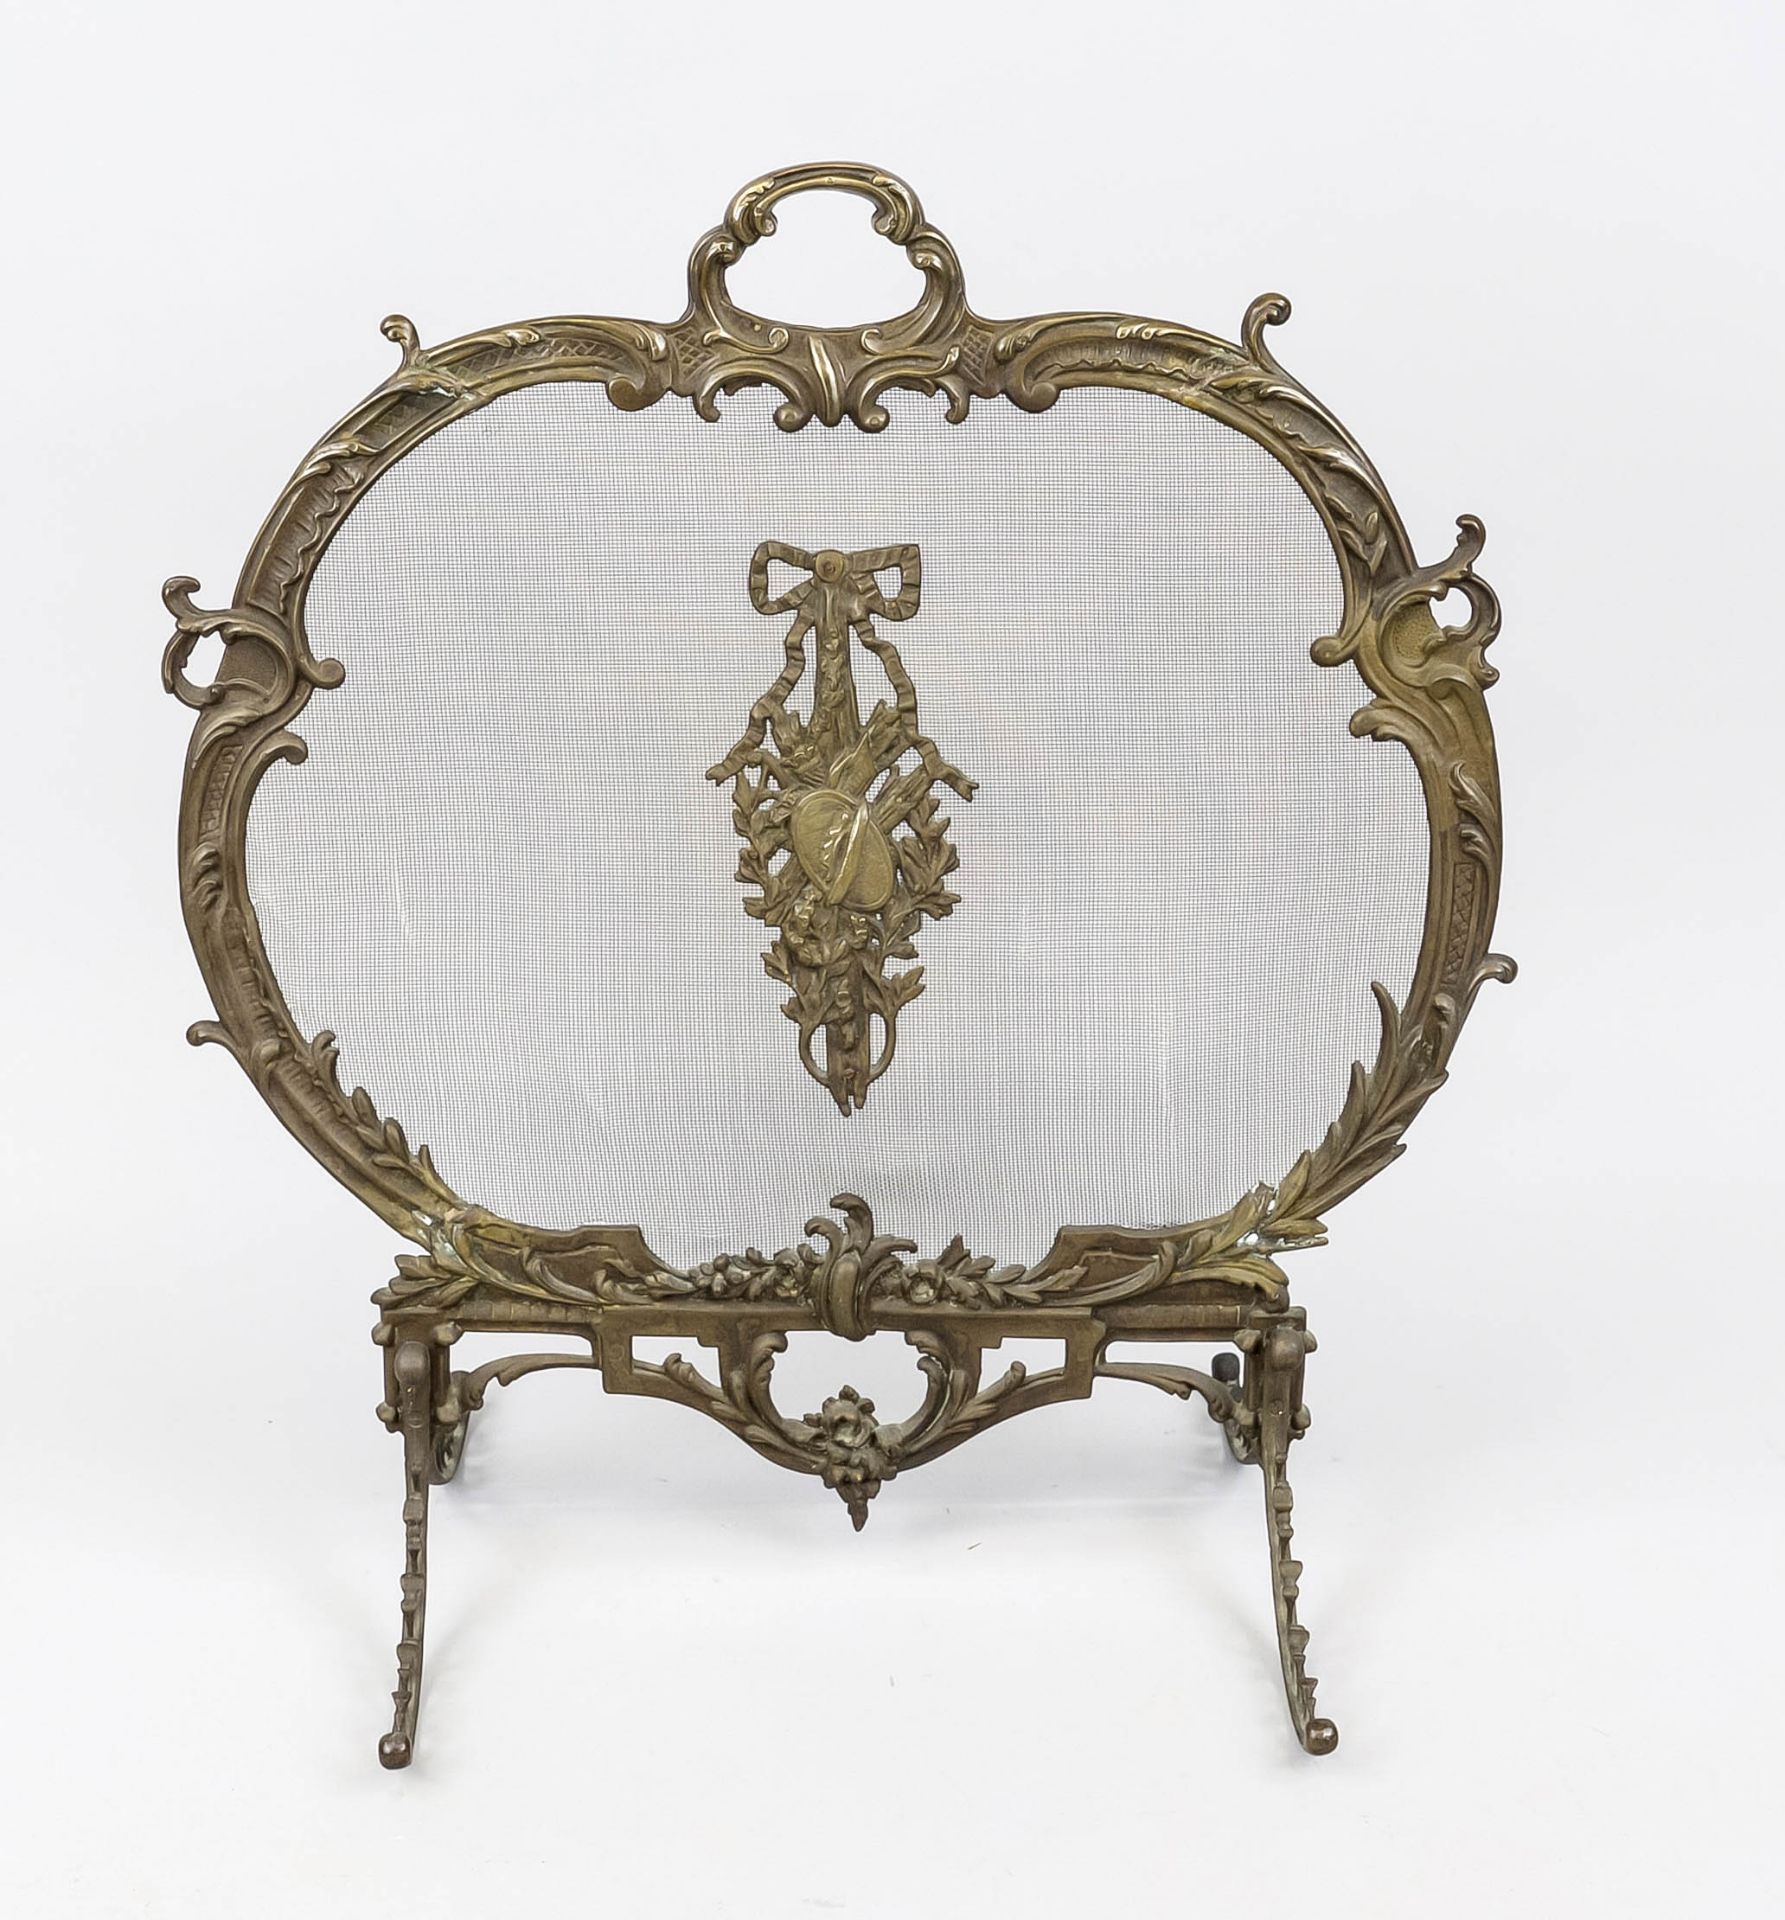 Fireplace screen, late 19th century, bronze. Fitting curved rocaille frame with spark grate,